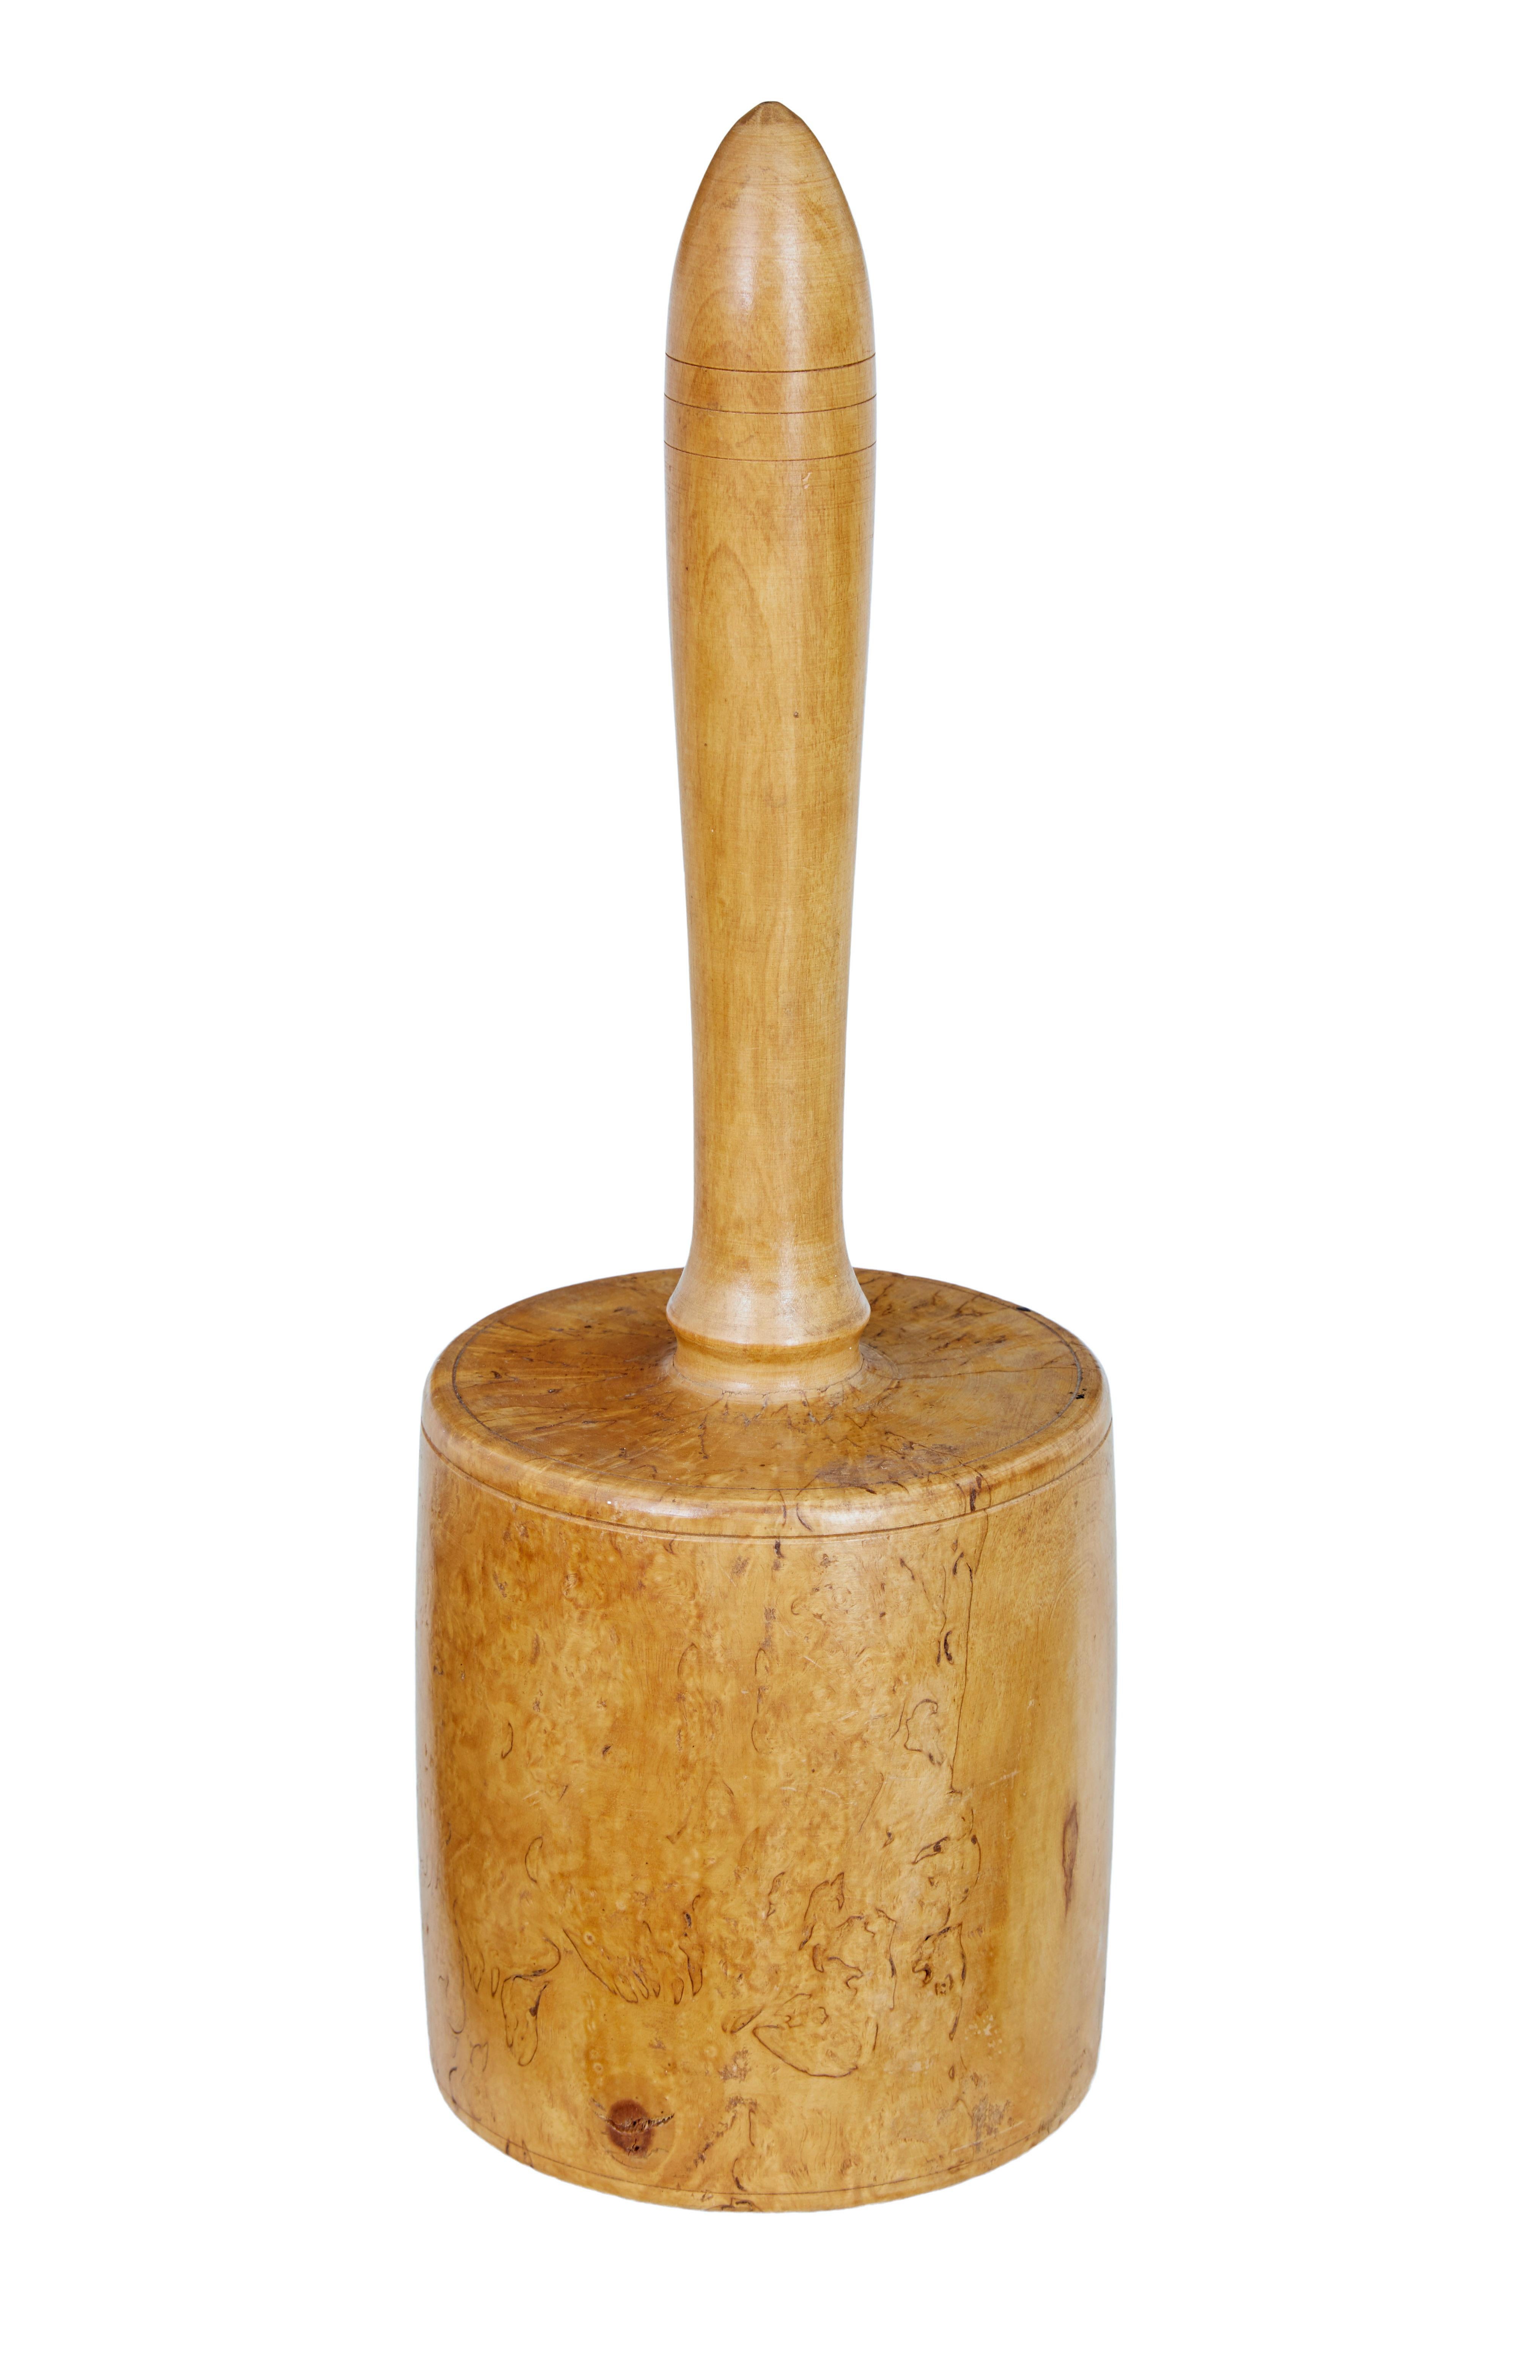 Early 20th century solid burr birch mallet circa 1900.

Turned from a solid piece of burr birch this sculptors mallet has little signs of use.  1 piece, handle with feint turned detailing.

Ideal decorative desktop item, or for further use.